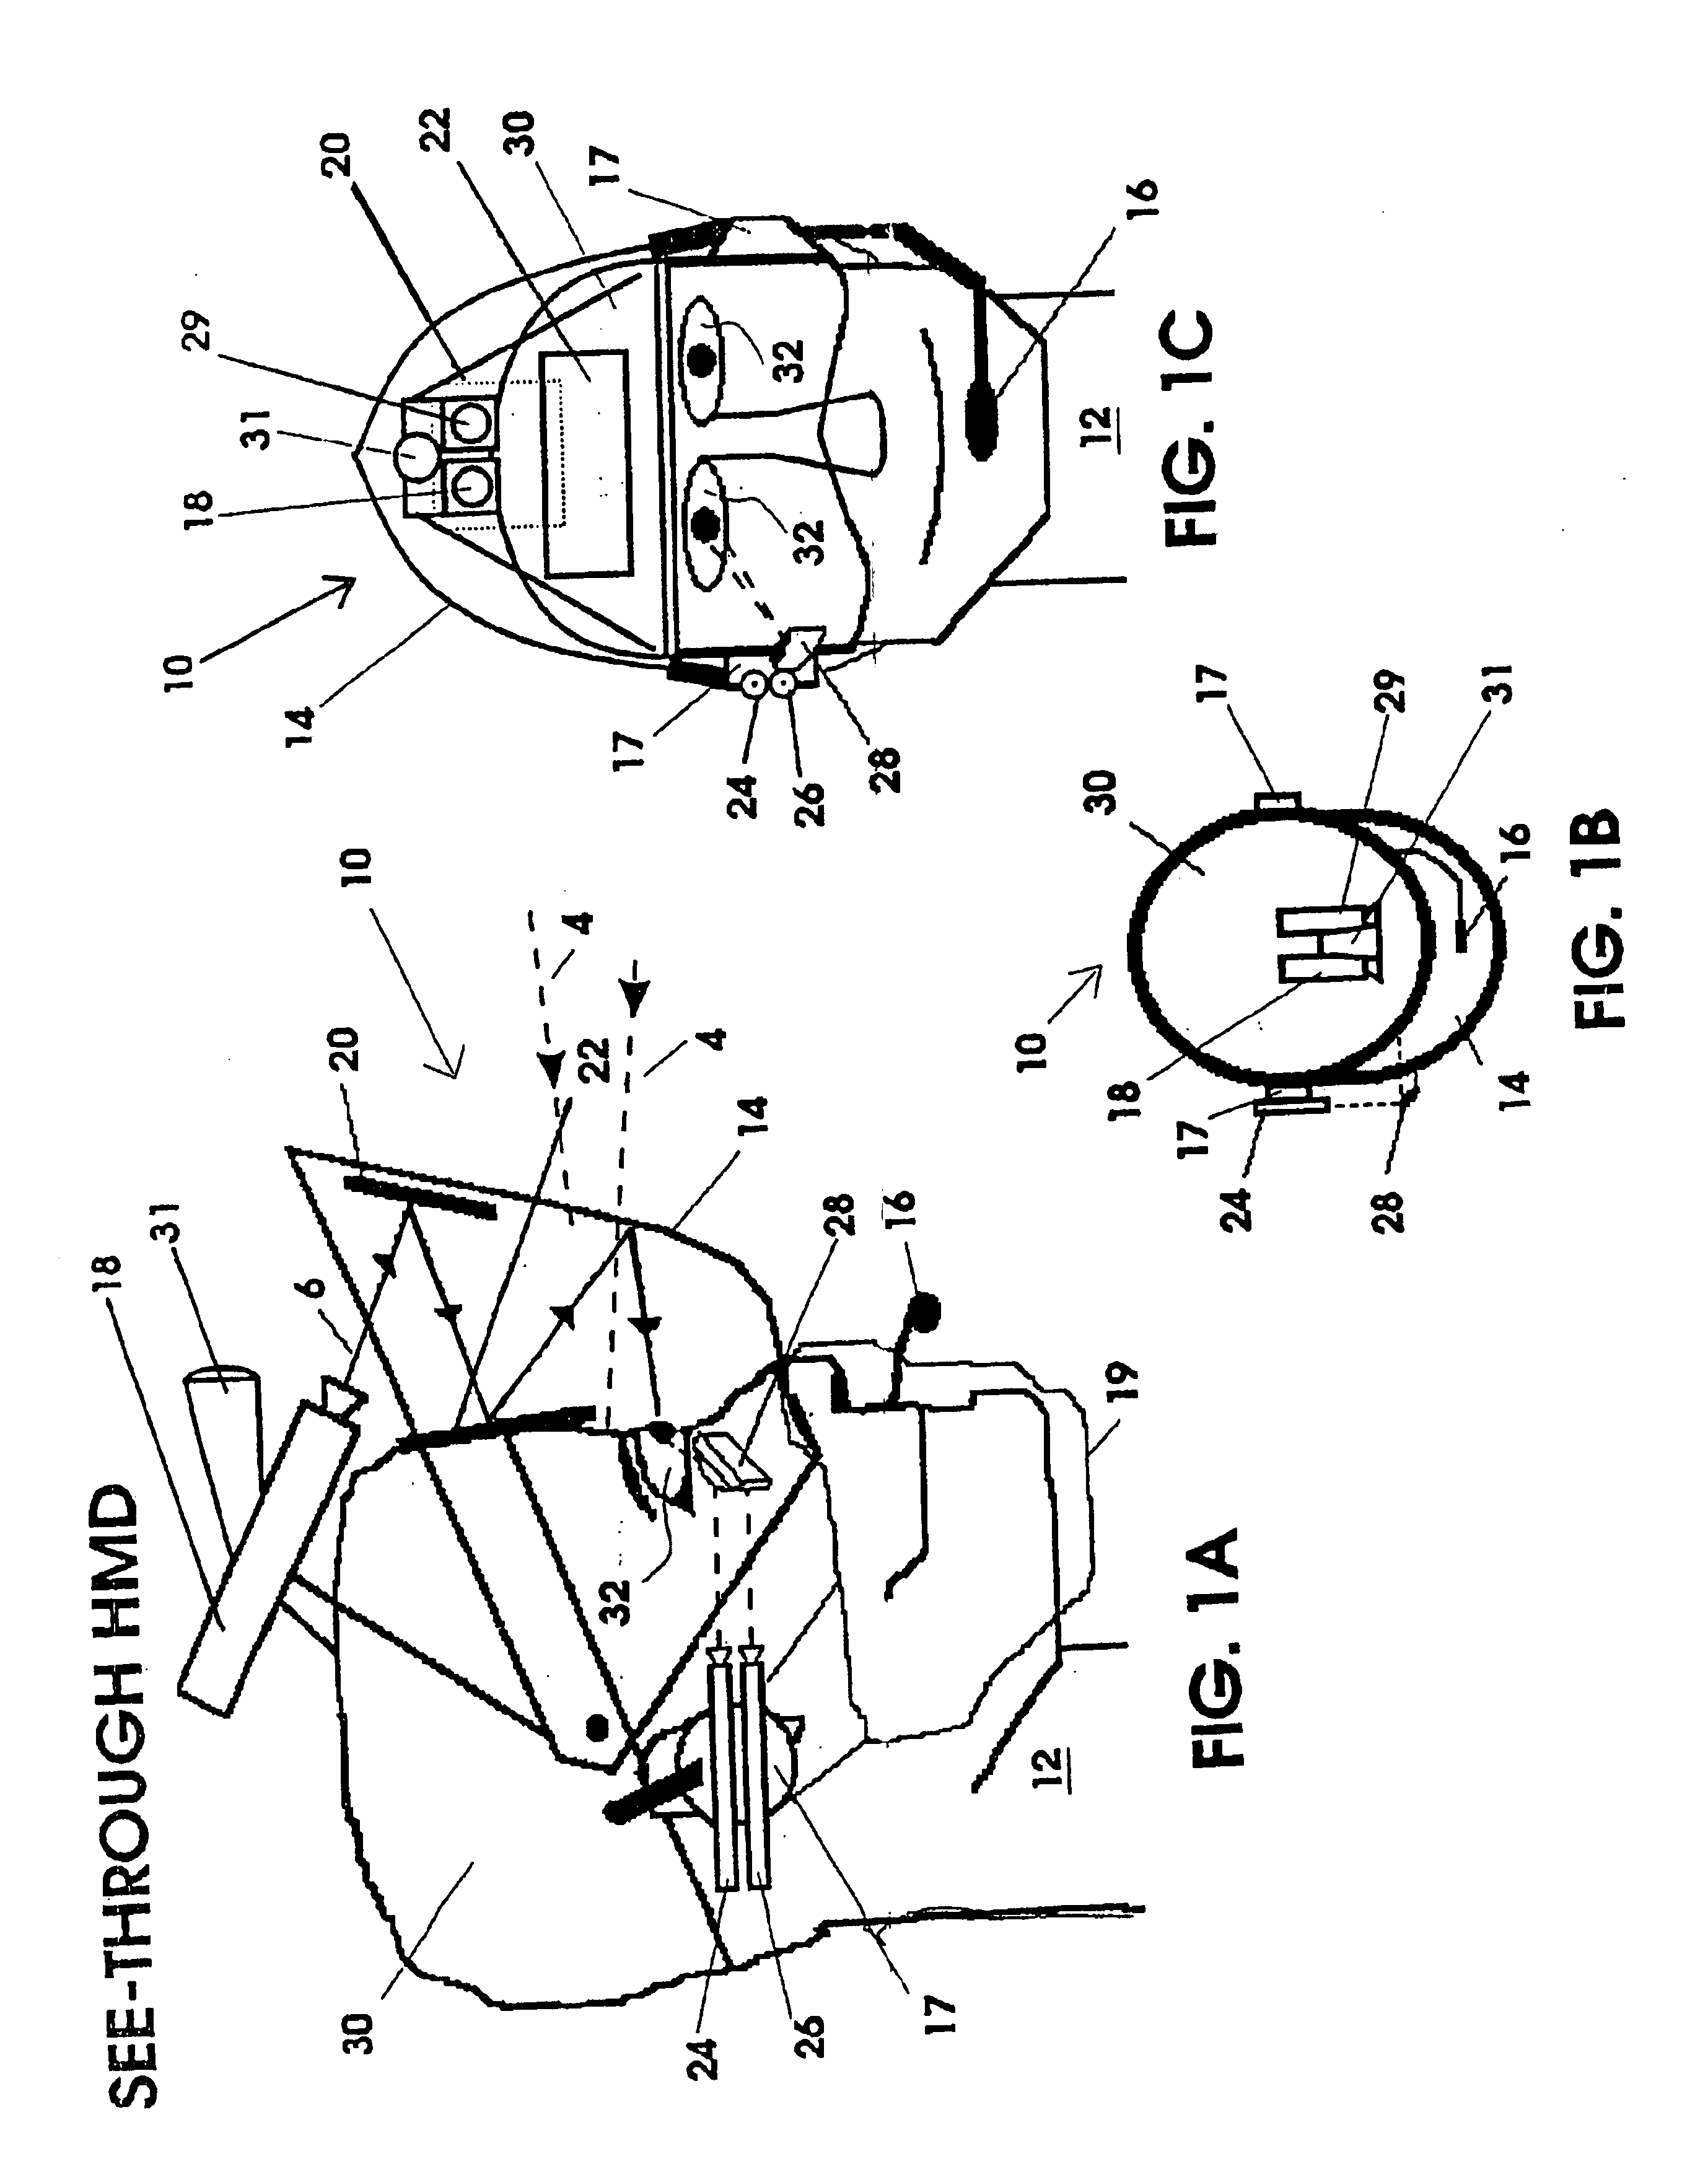 Selectively controllable heads-up display system